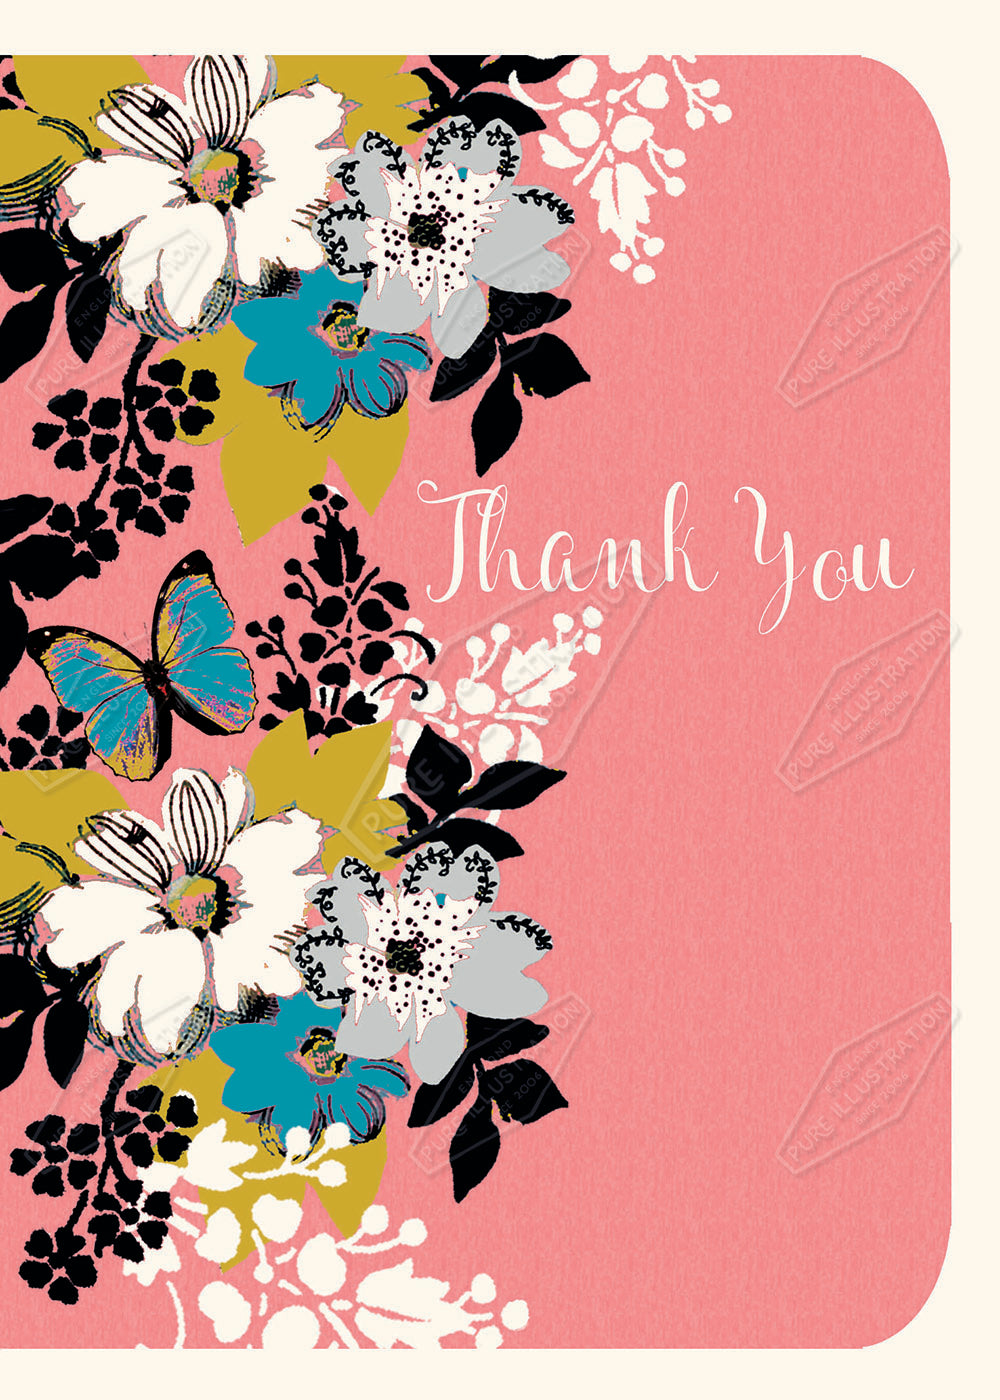 00029745DEV - Deva Evans is represented by Pure Art Licensing Agency - Thank You Greeting Card Design